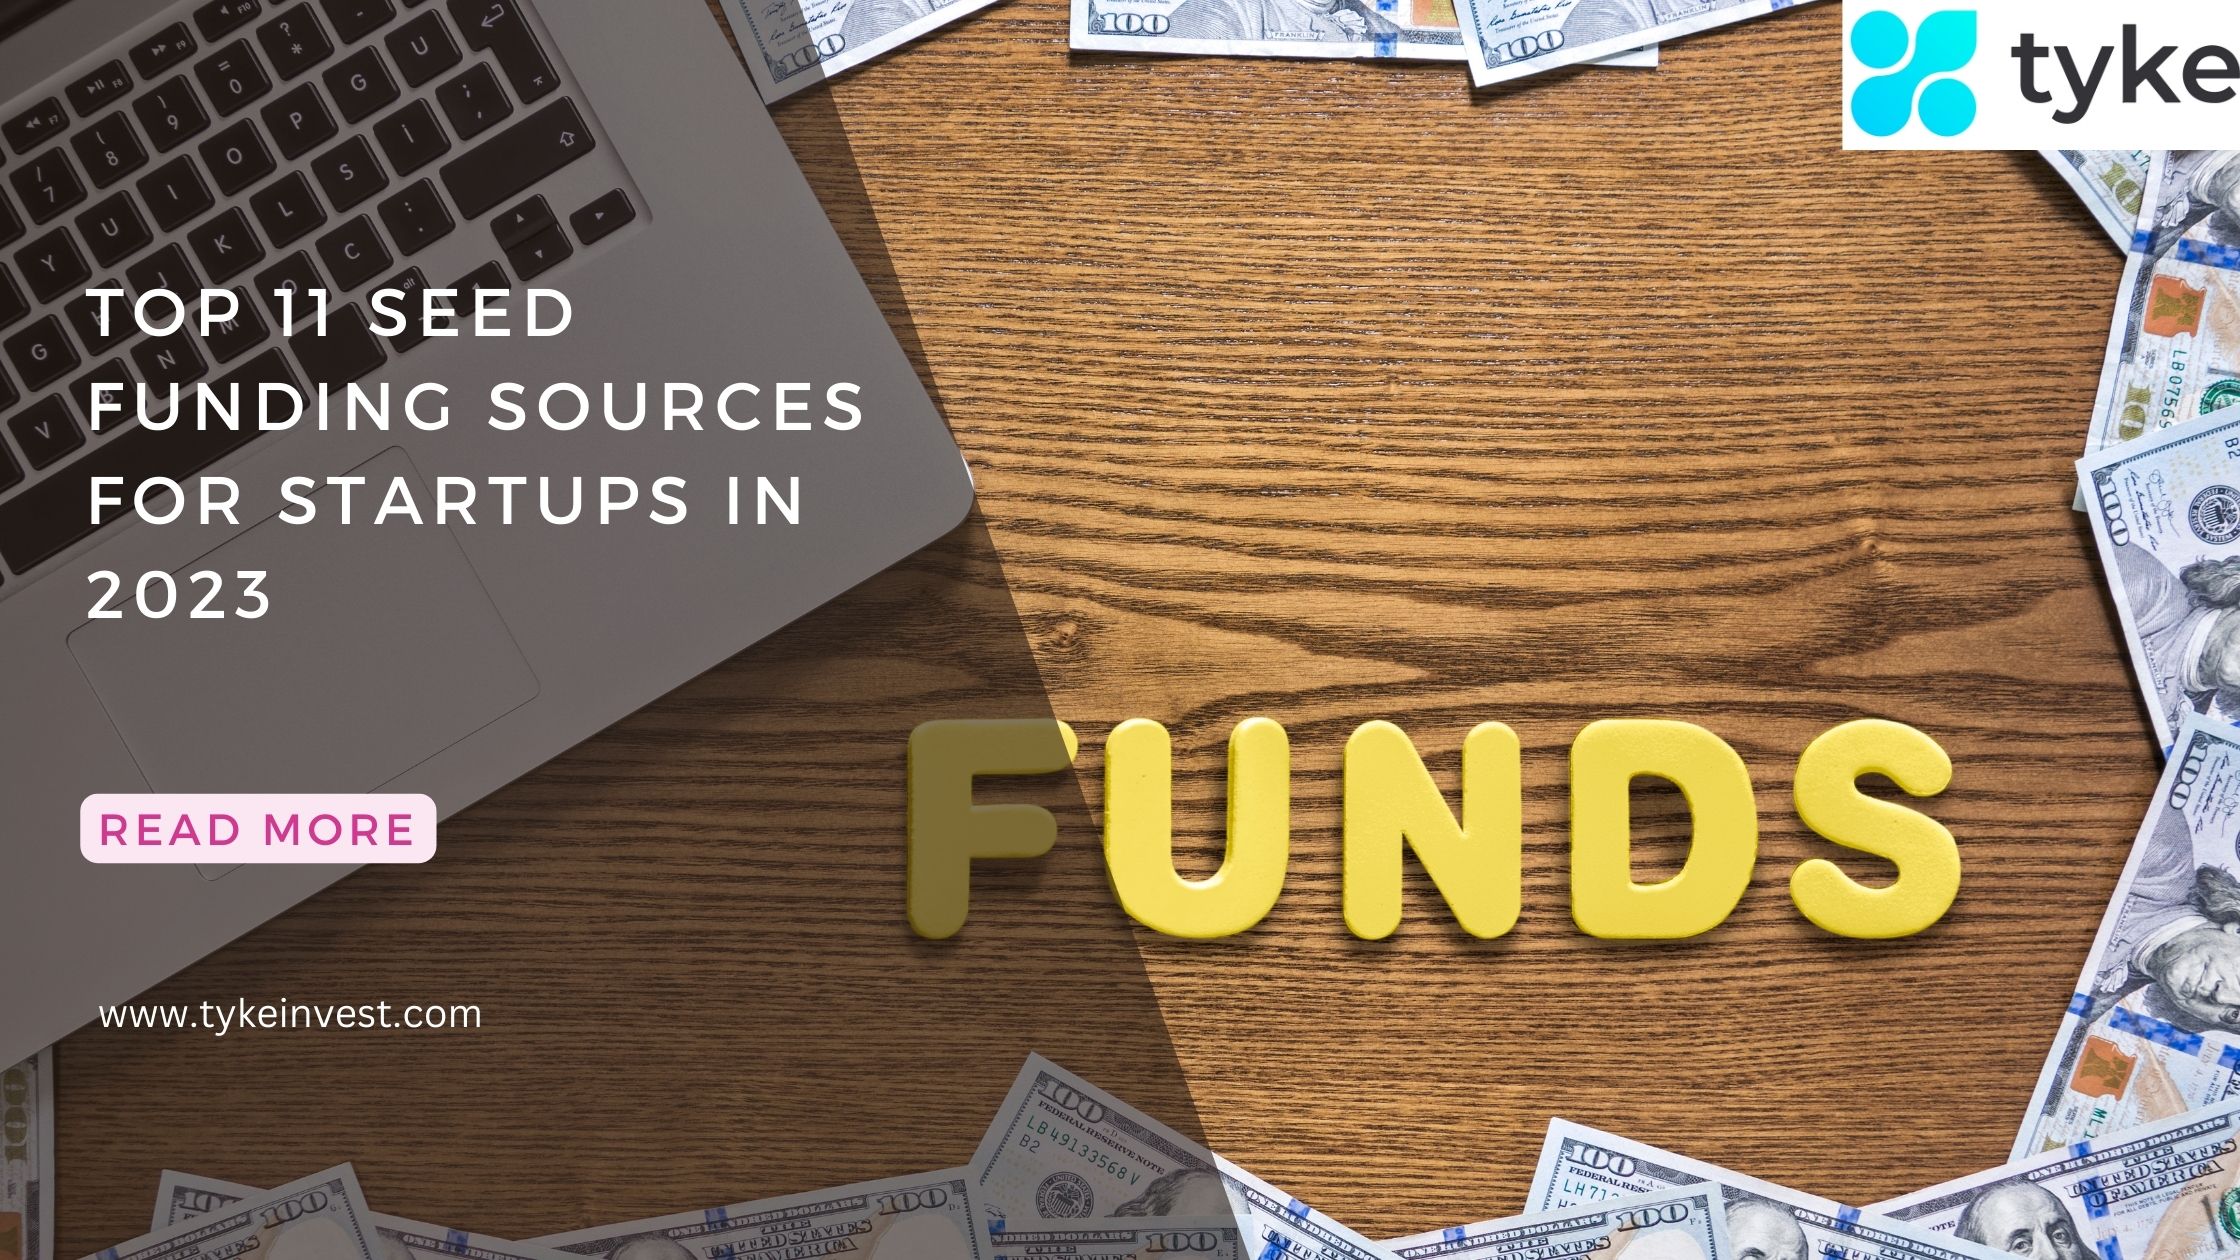 Top 11 seed funding sources for startups in 2023